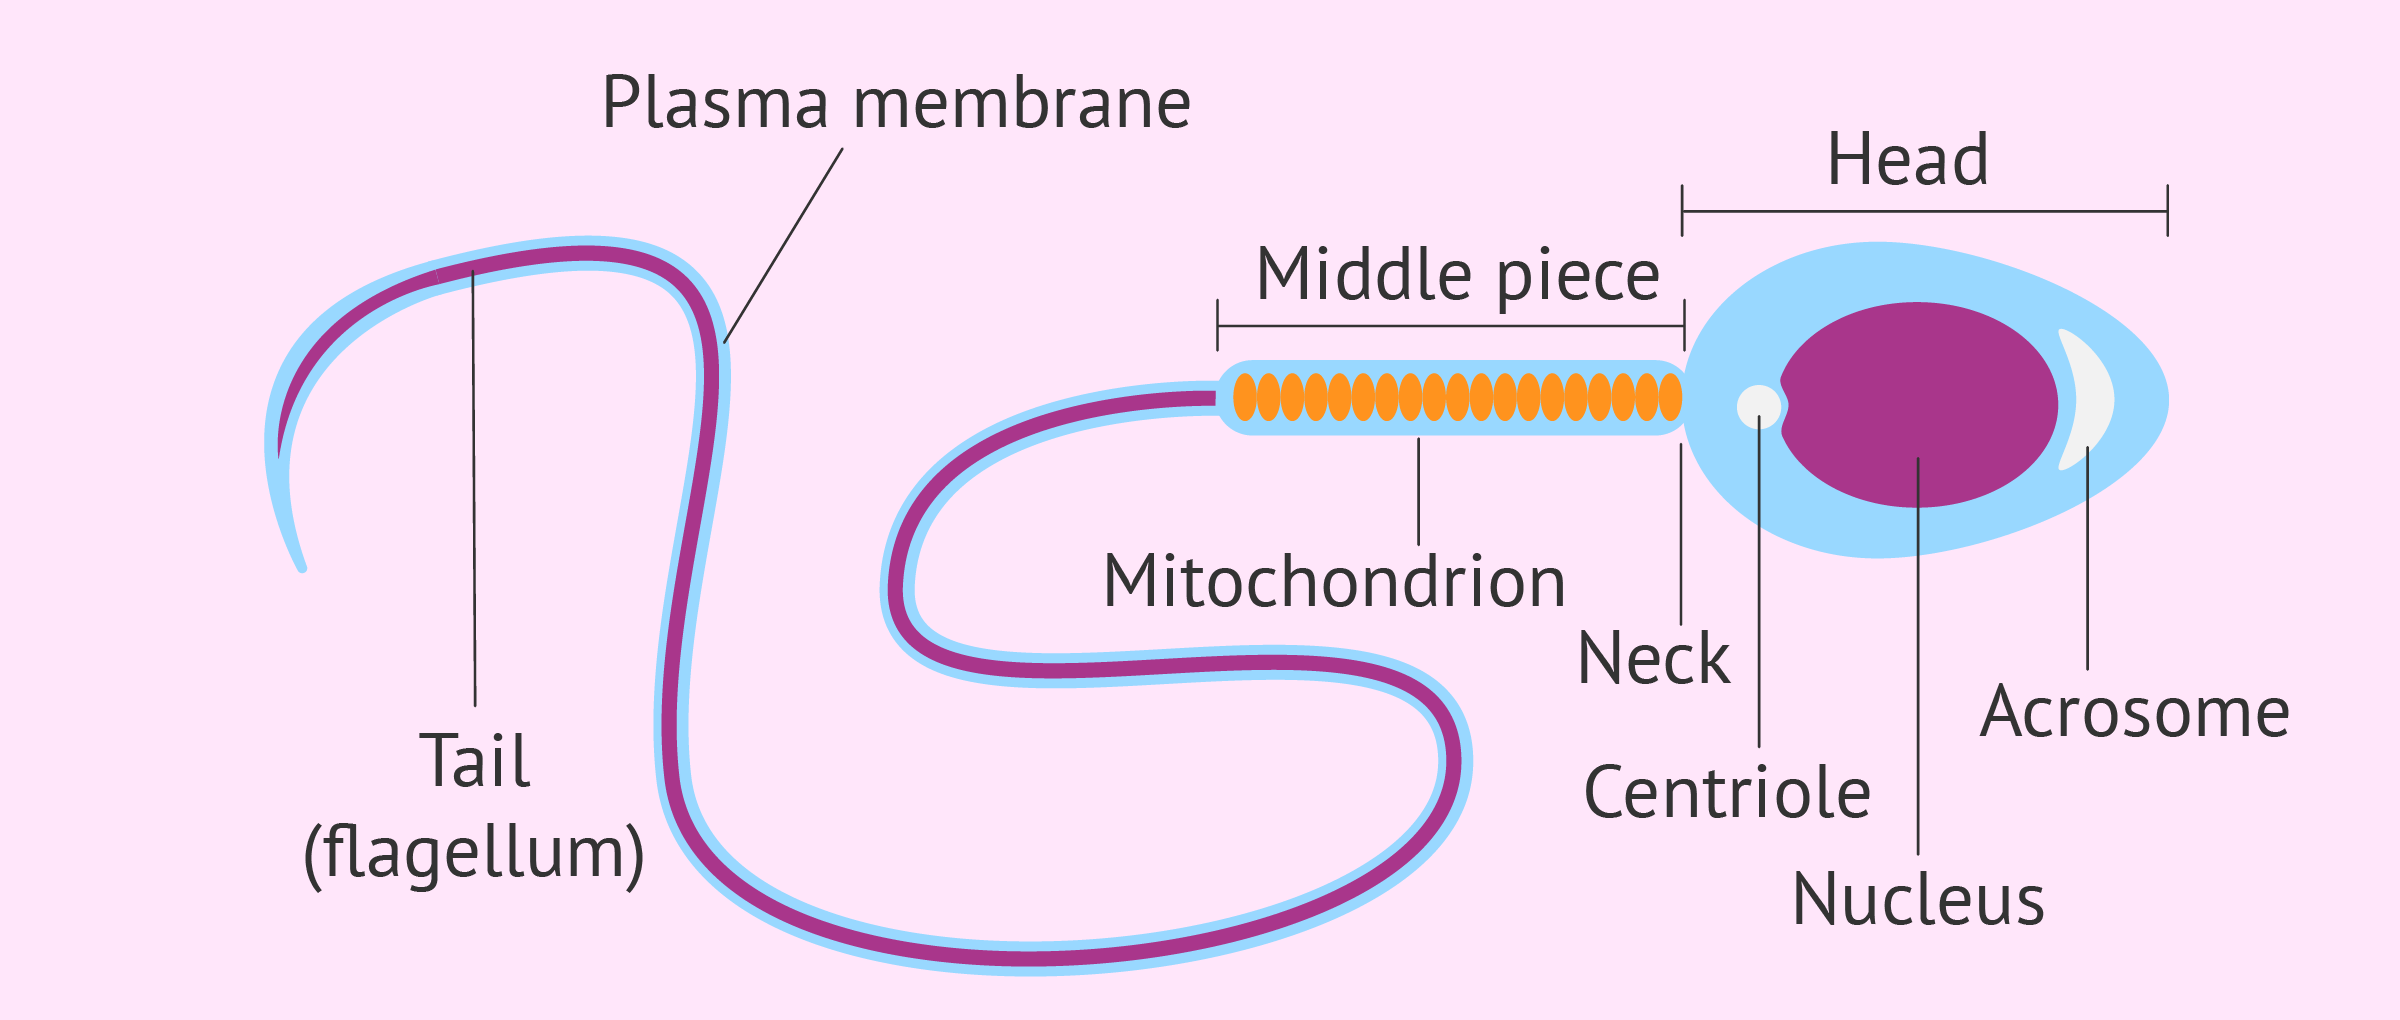 Function of a sperm cell